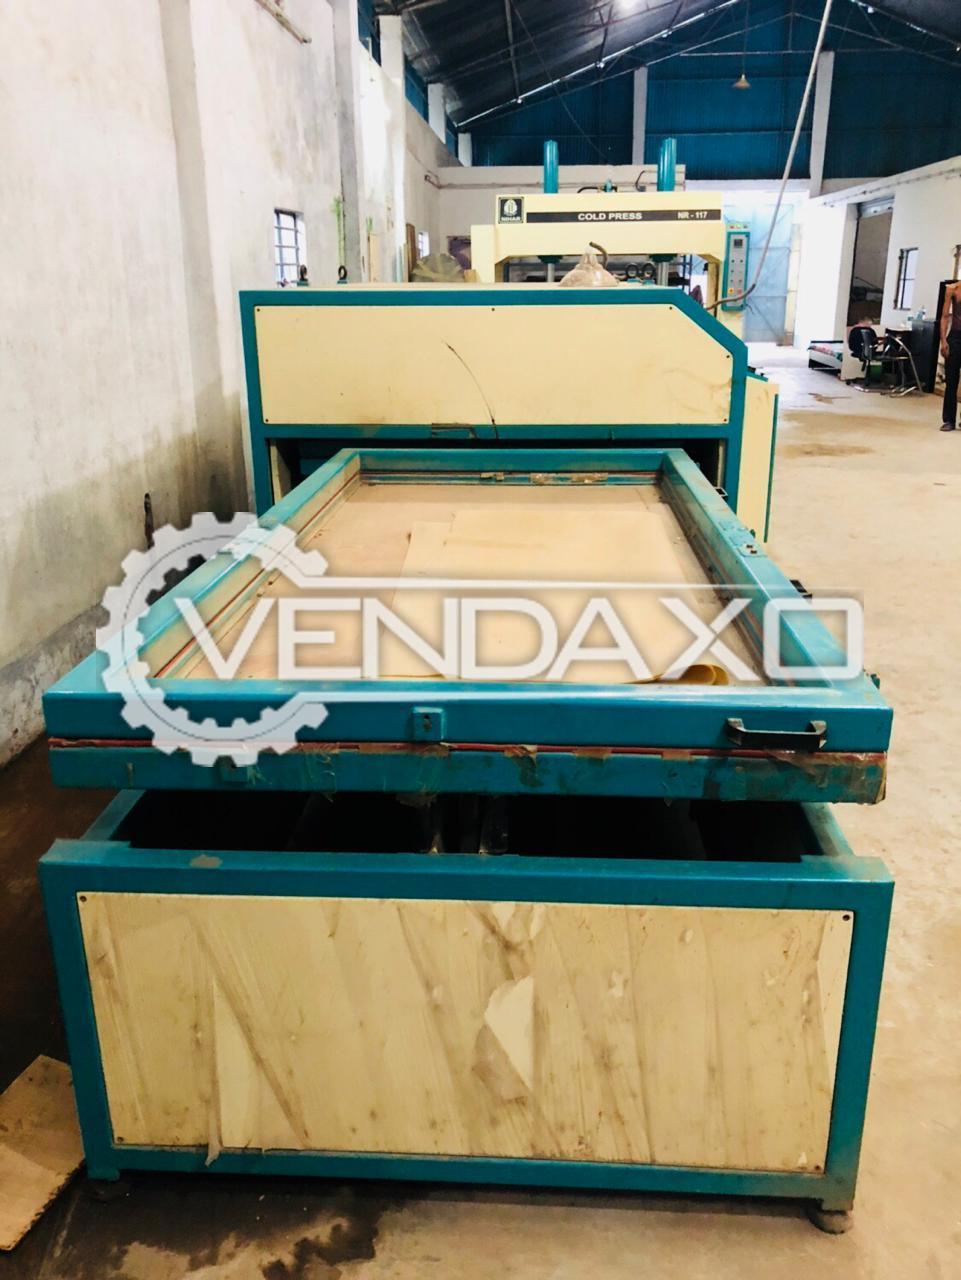 Used Other Wood Processing Machinery For Sale Buy Or Sell Used Other Wood Processing Machinery Online Vendaxo